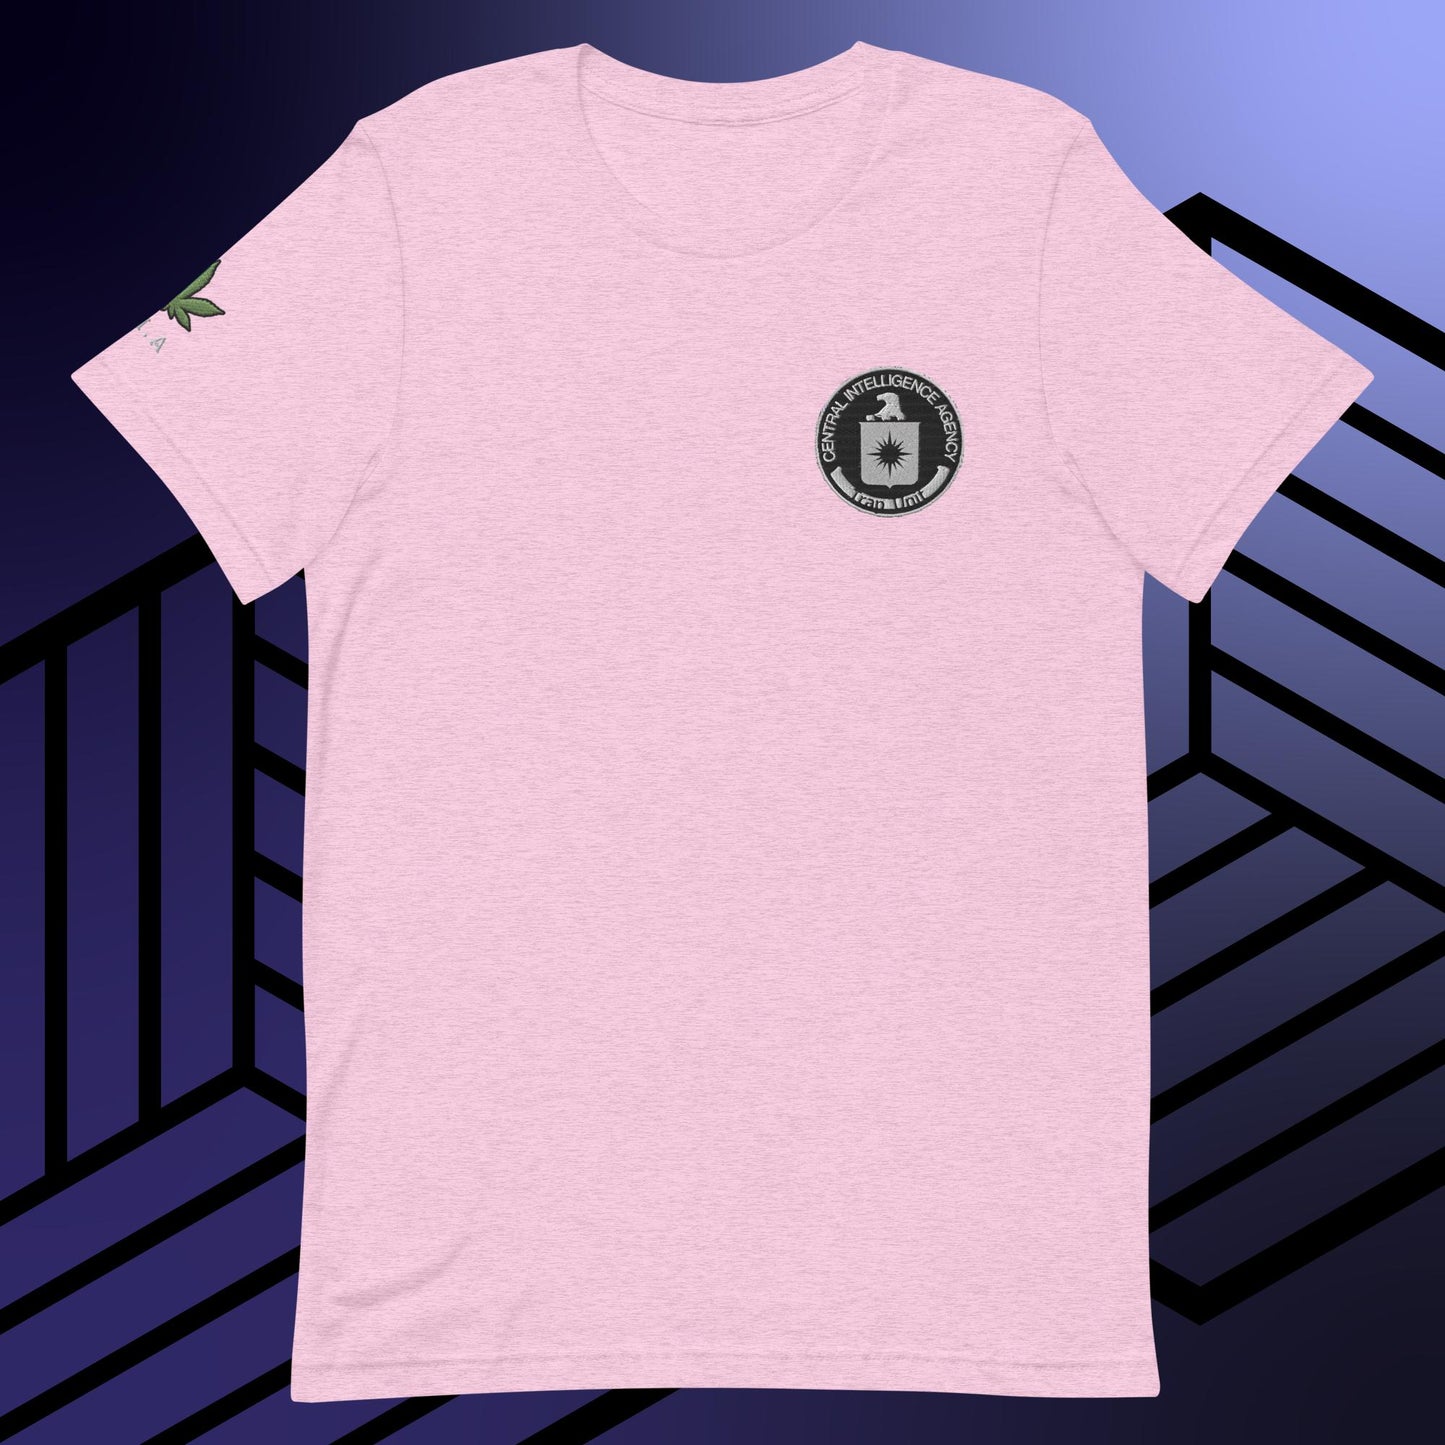 a pink t - shirt with a starbucks logo on it